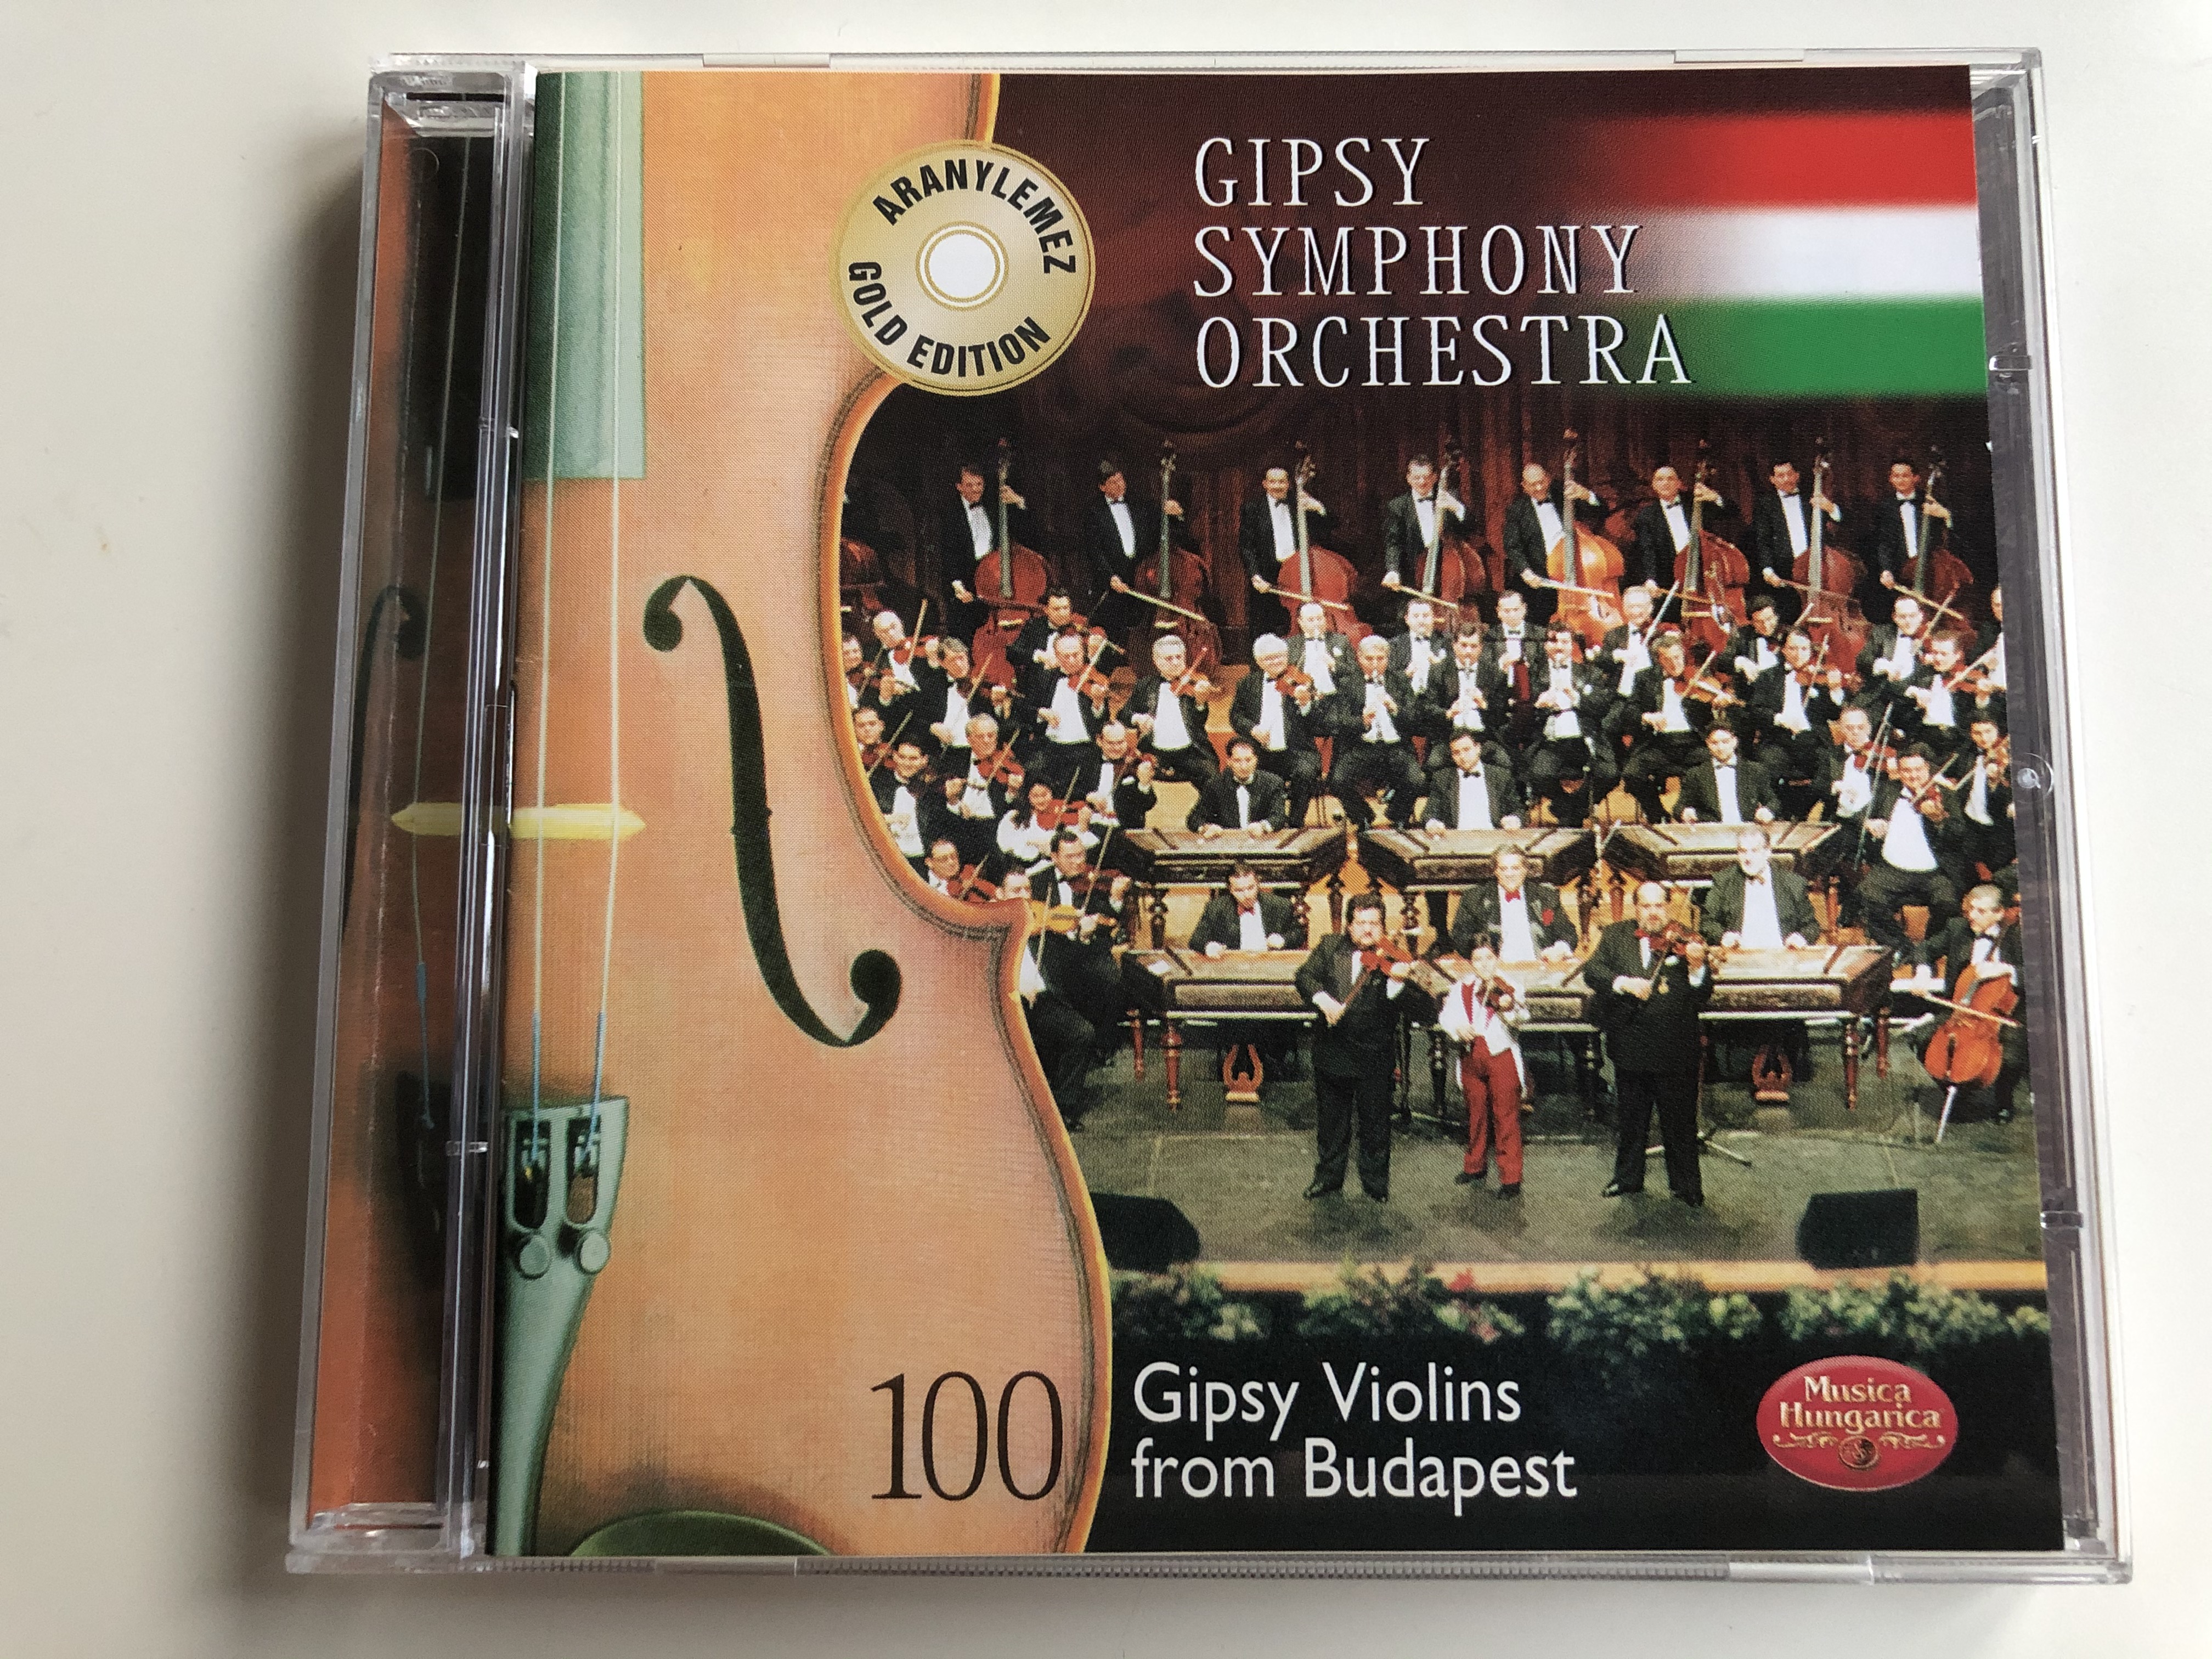 gipsy-symphony-orchestra-100-gypsy-violins-from-budapest-gold-edition-musica-hungarica-audio-cd-1999-stereo-mha-112-1-.jpg